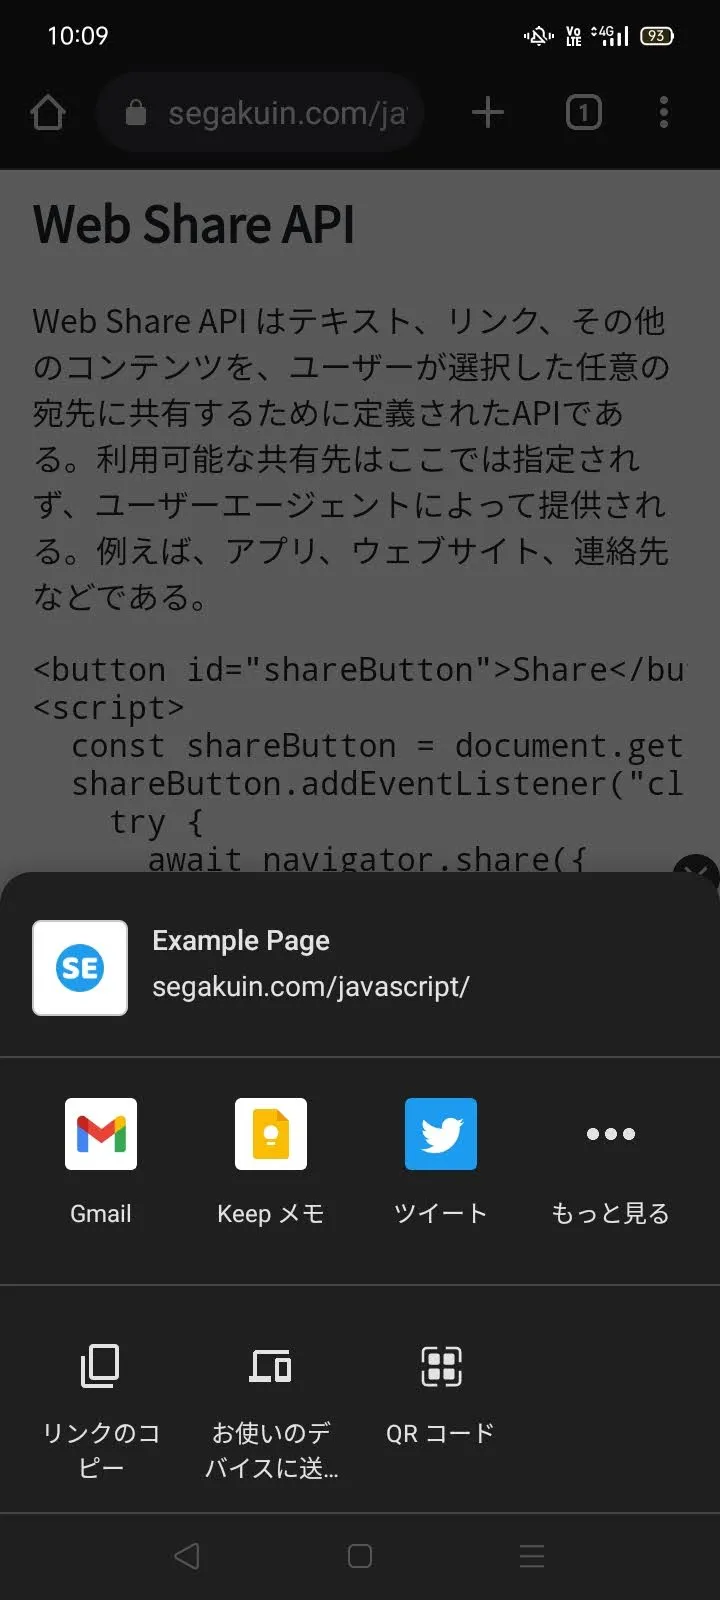 Web Share API on Android